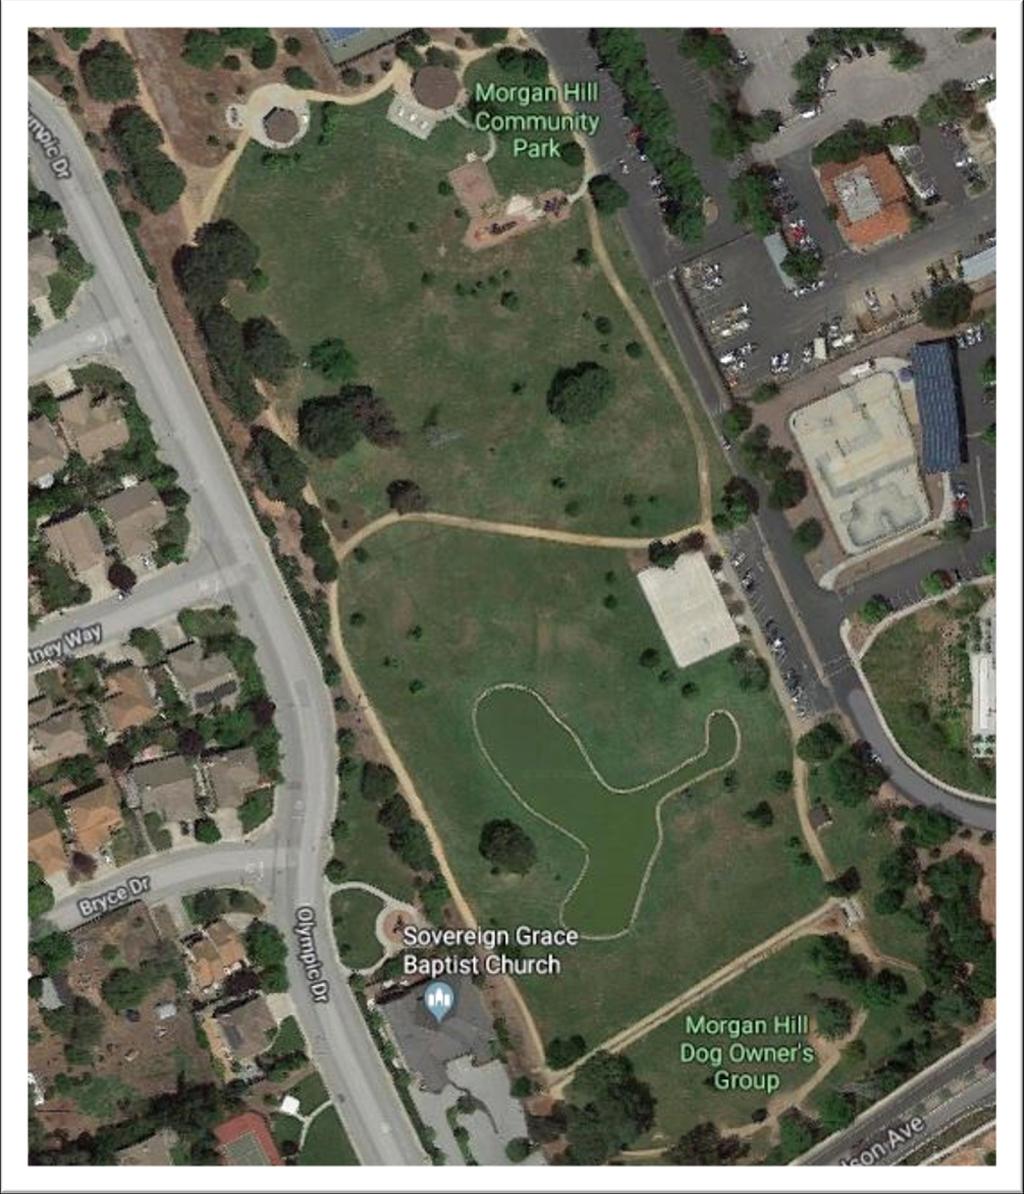 KIDS RUN ON SATURDAY (1 MILE) - The Kids Run will be a 1-mile course around the Morgan Hill Community Park on Saturday morning during packet pickup.